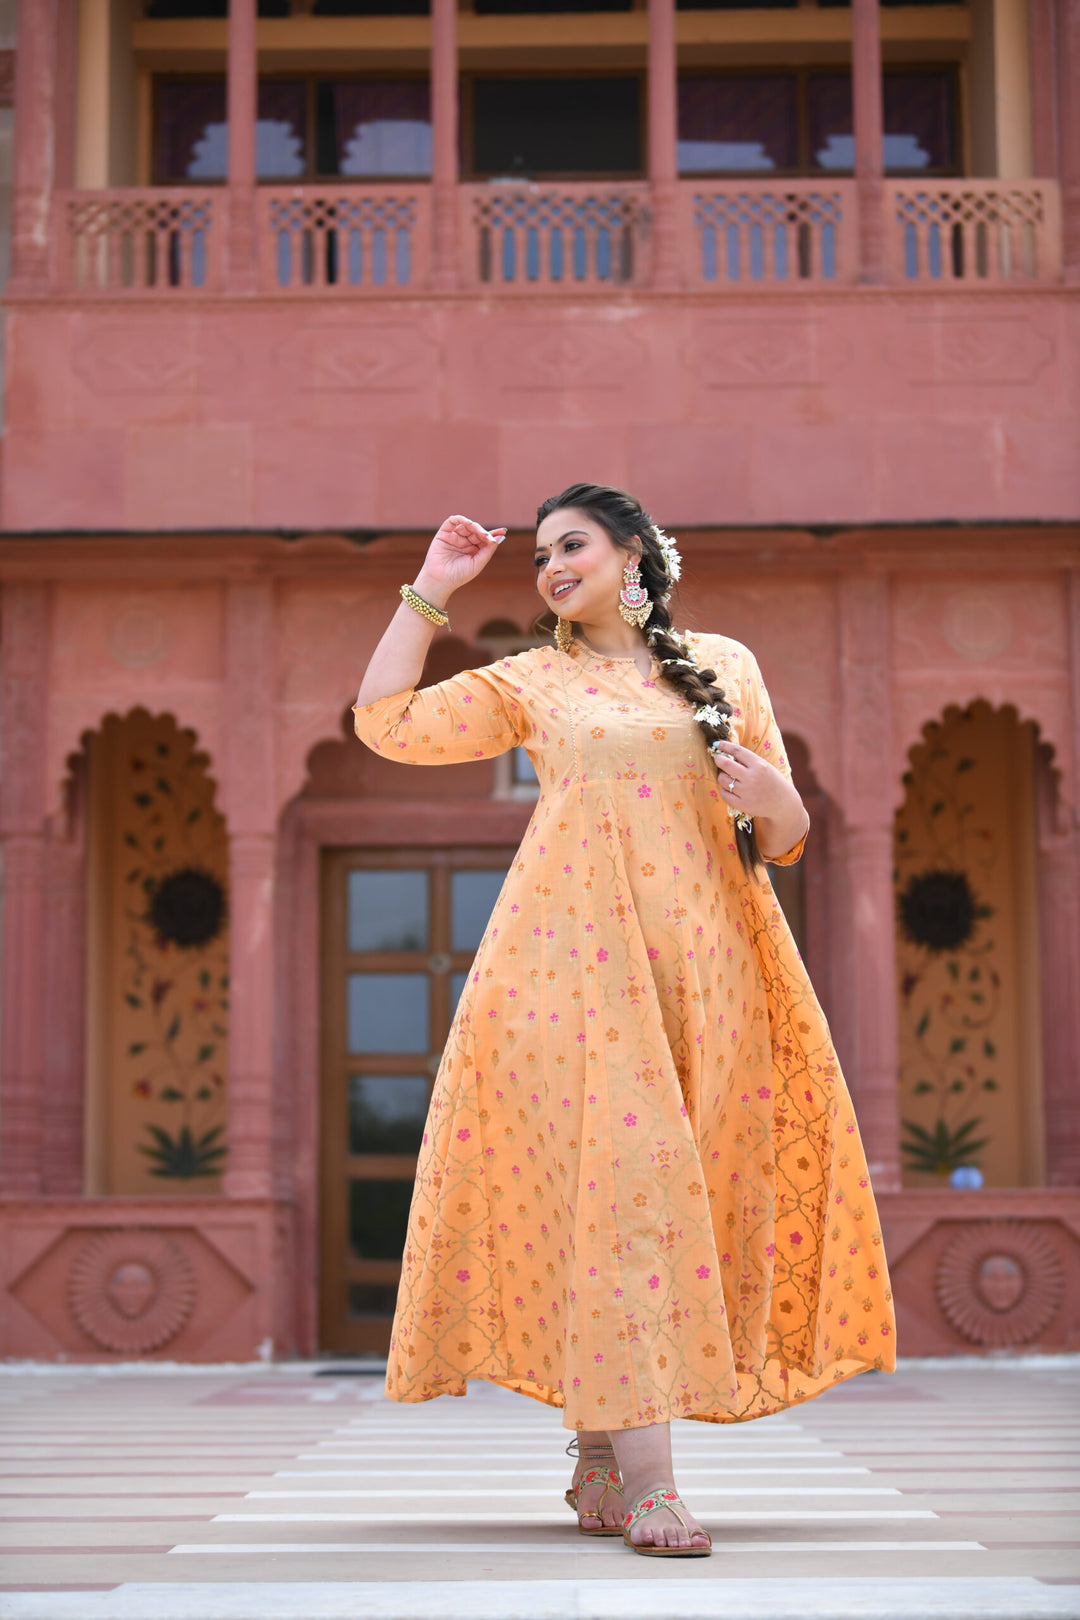 Buy Peach Cotton Gown for Women | Best Party Wear Ethnic Dress for Ladies     